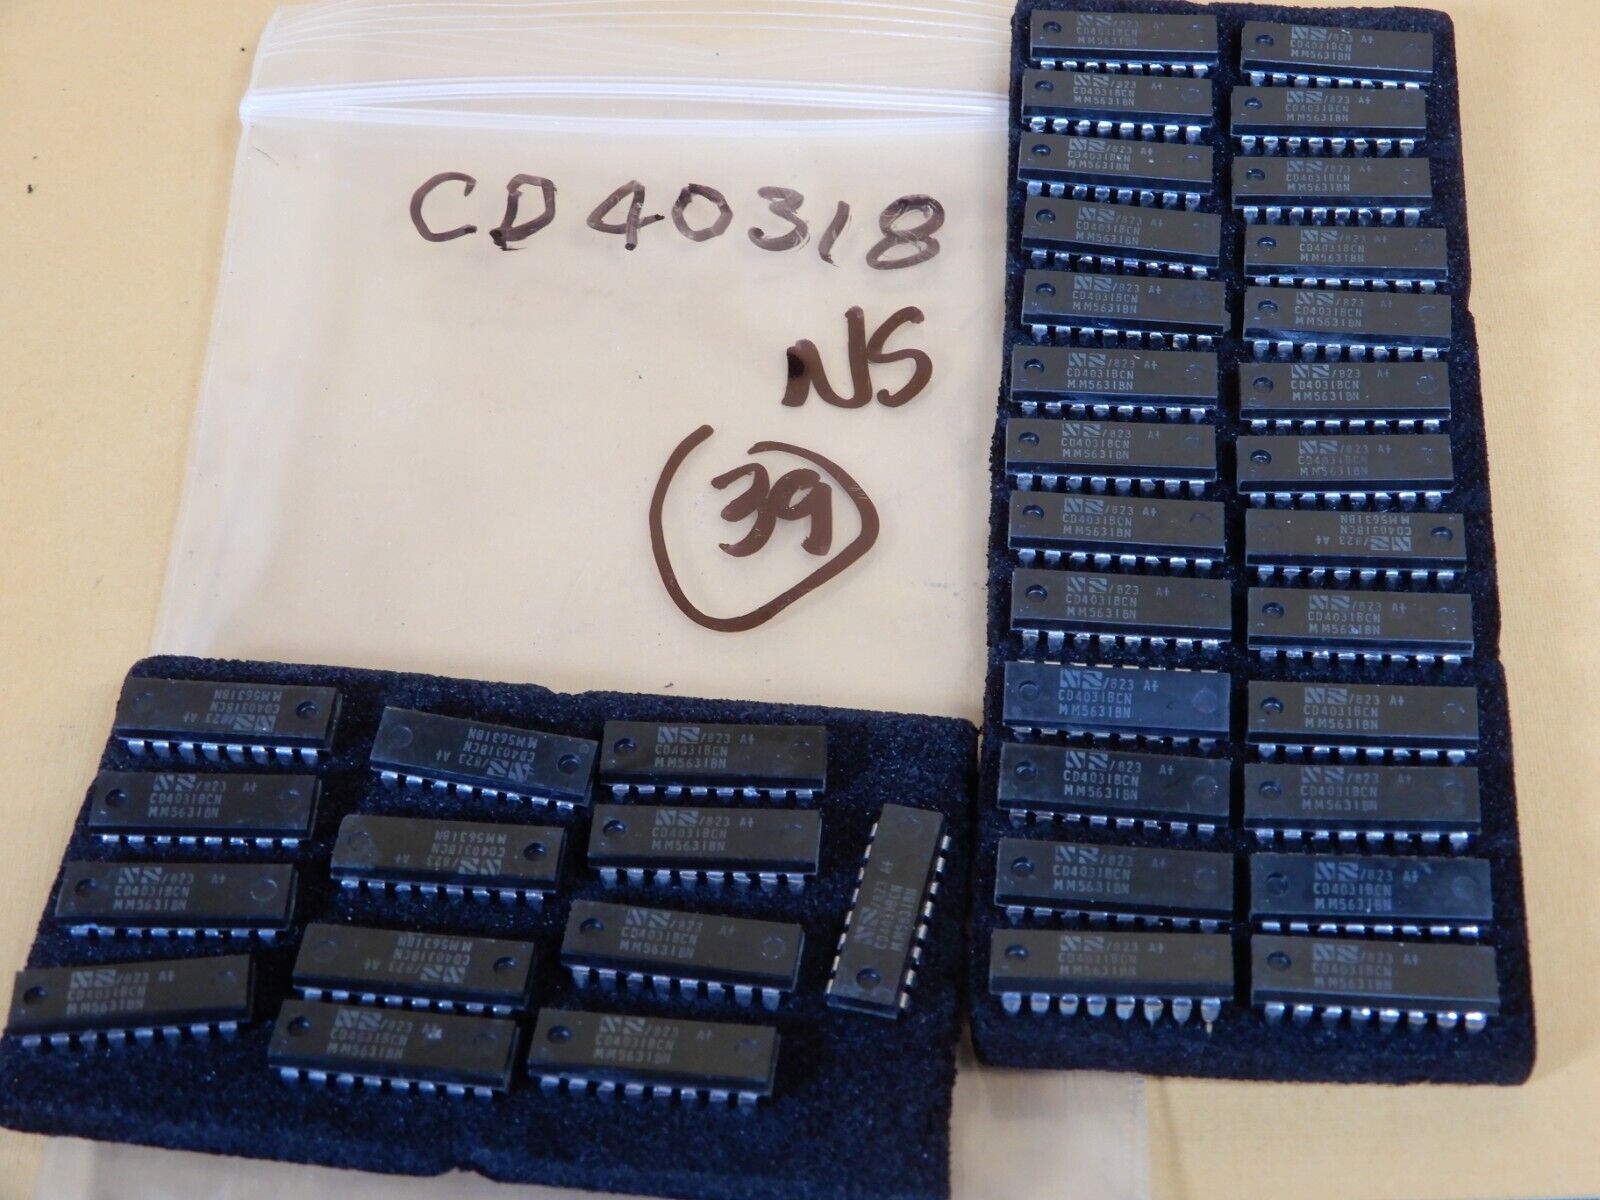 National Semiconductor CD4031BCN 16 Pin IC's Qty 39 NOS